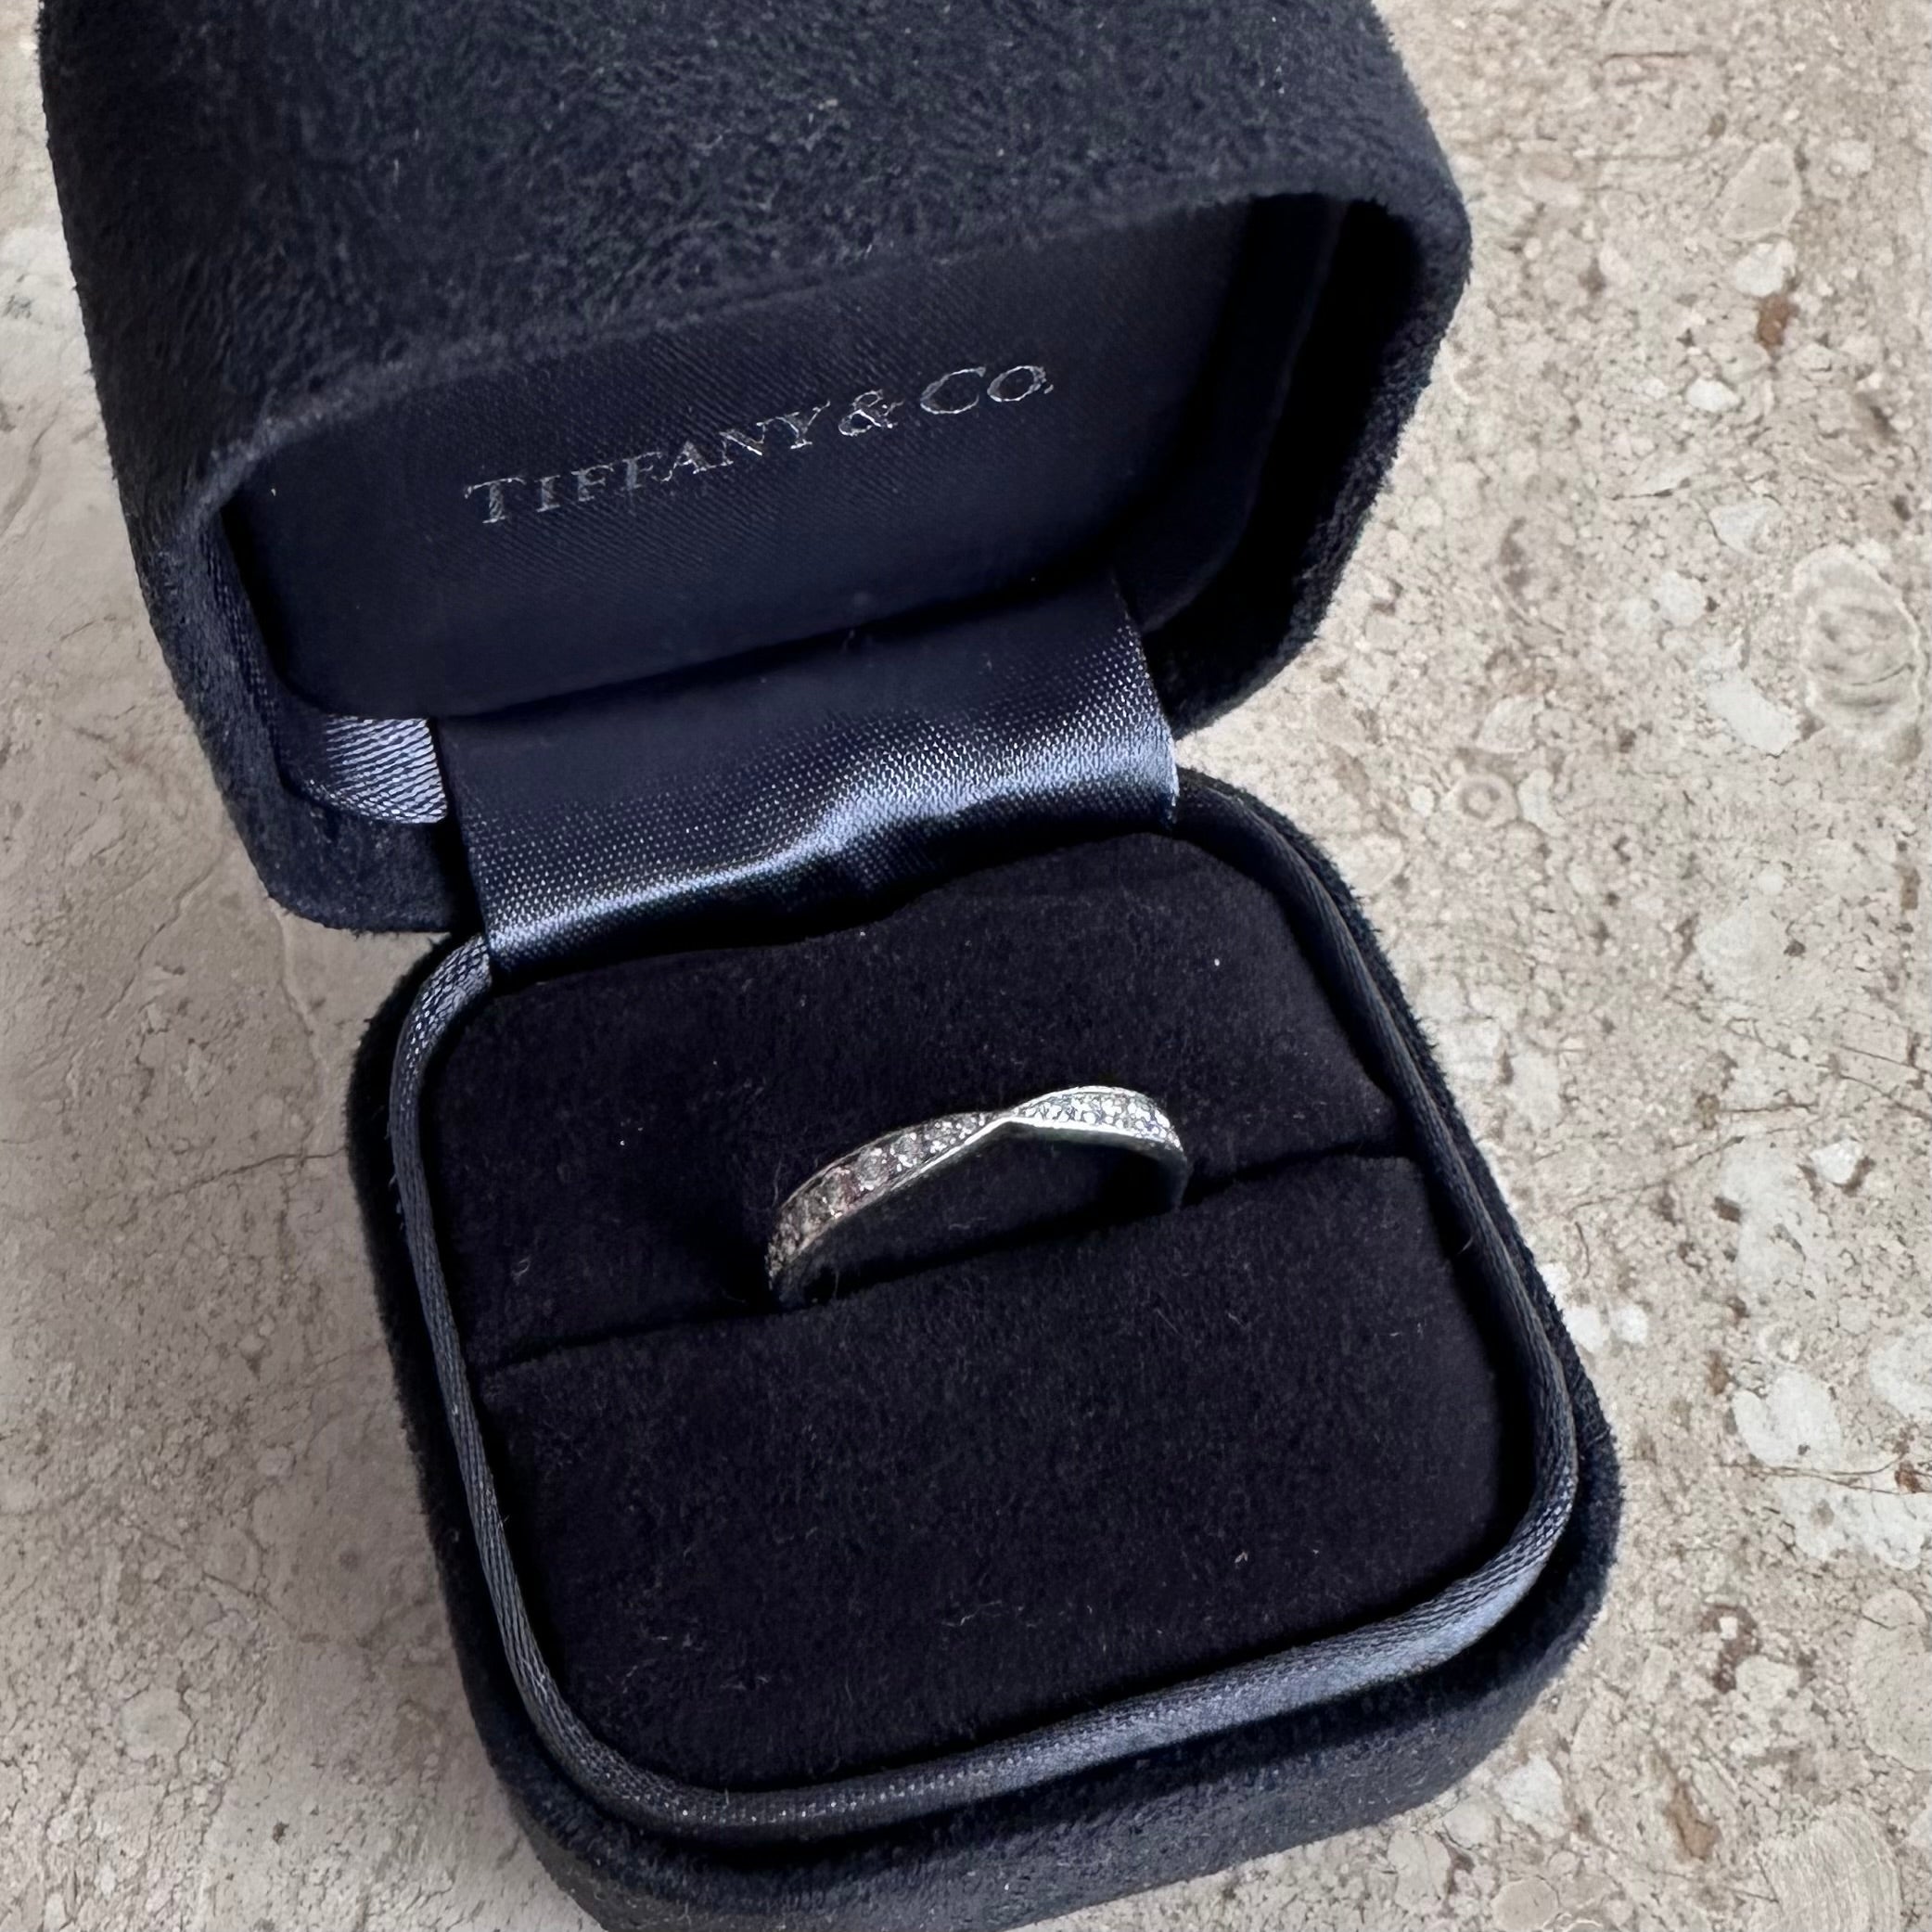 Pre-Owned TIFFANY & Co. Harmony Band Ring with Diamonds Size 5